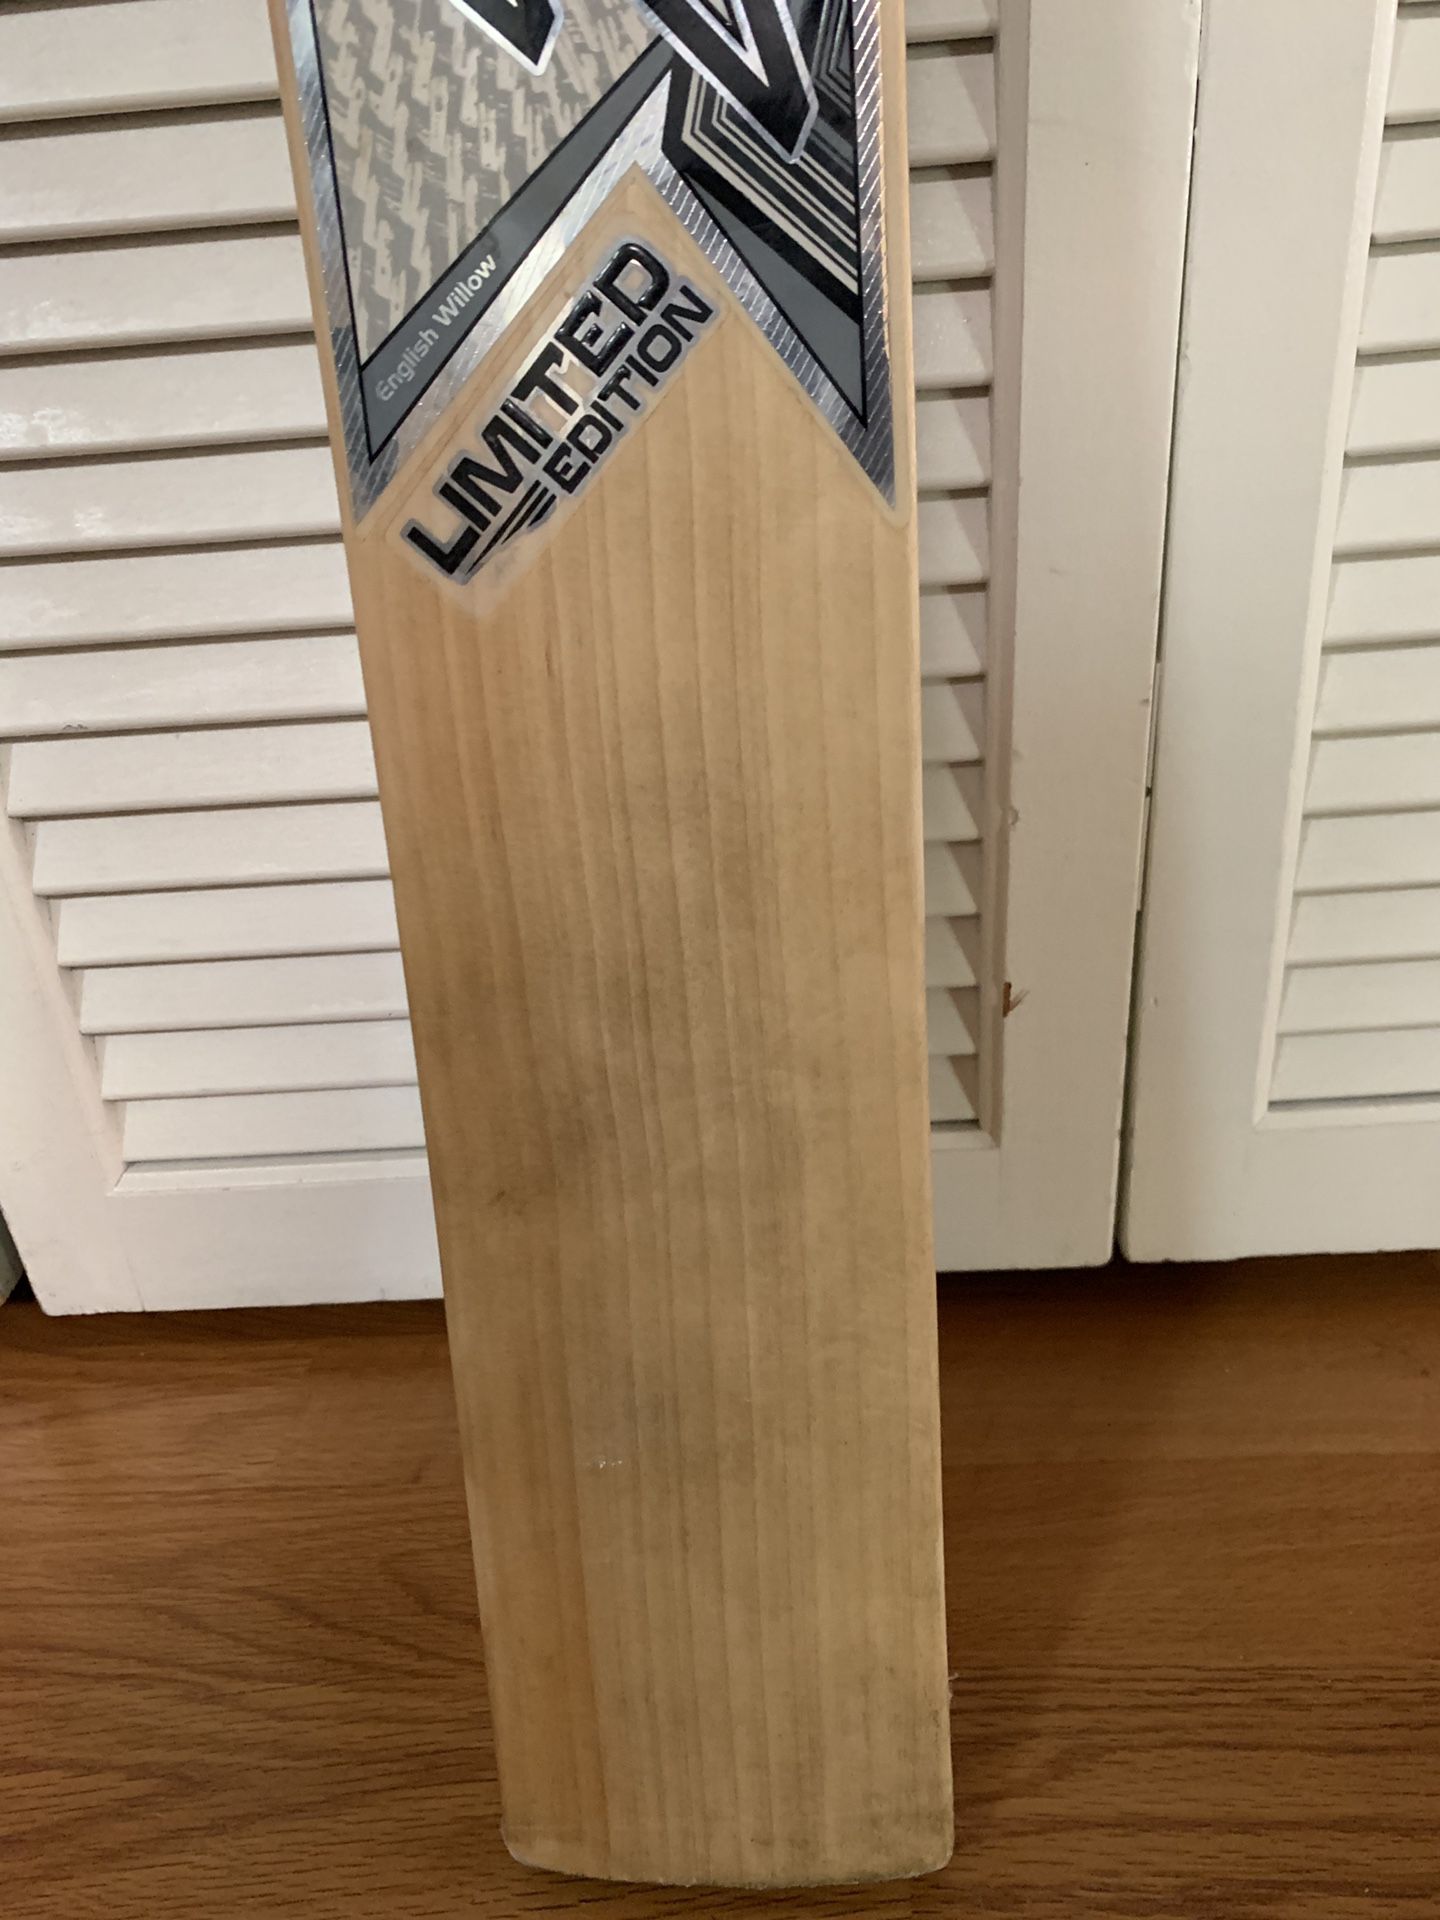 ZX Limited Edition English willow cricket bat for Sale in Fremont 